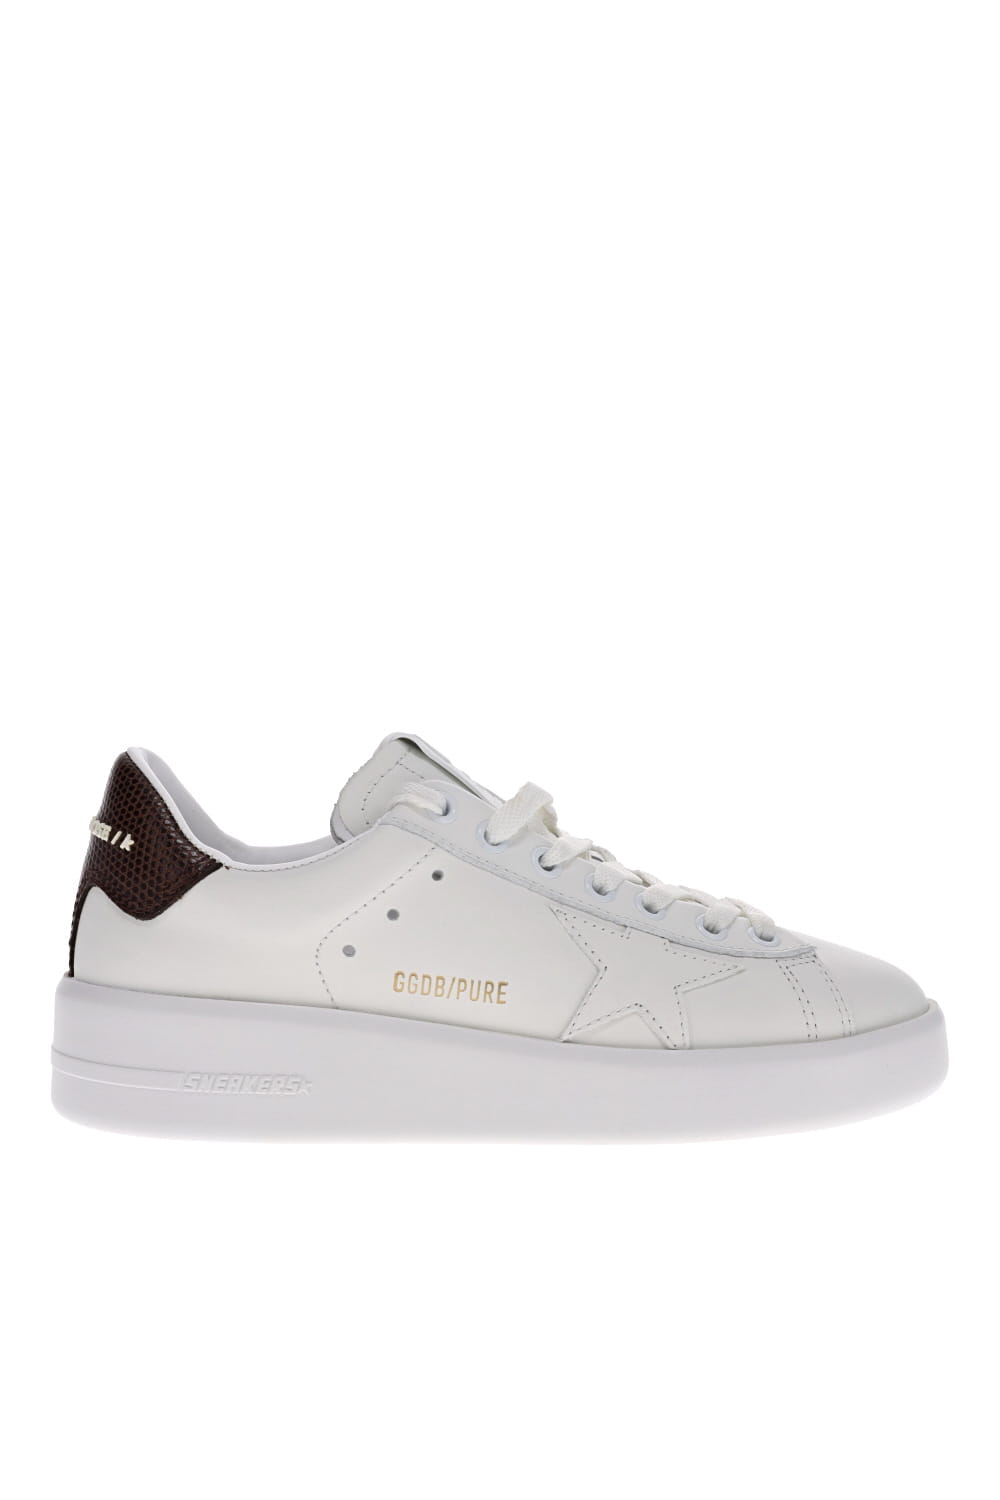 Golden Goose PURE STAR LEATHER UPPER LIZARD PRINTED LEATHER HEEL GWF00197.F005222.11635 WHITE/BURGUNDY